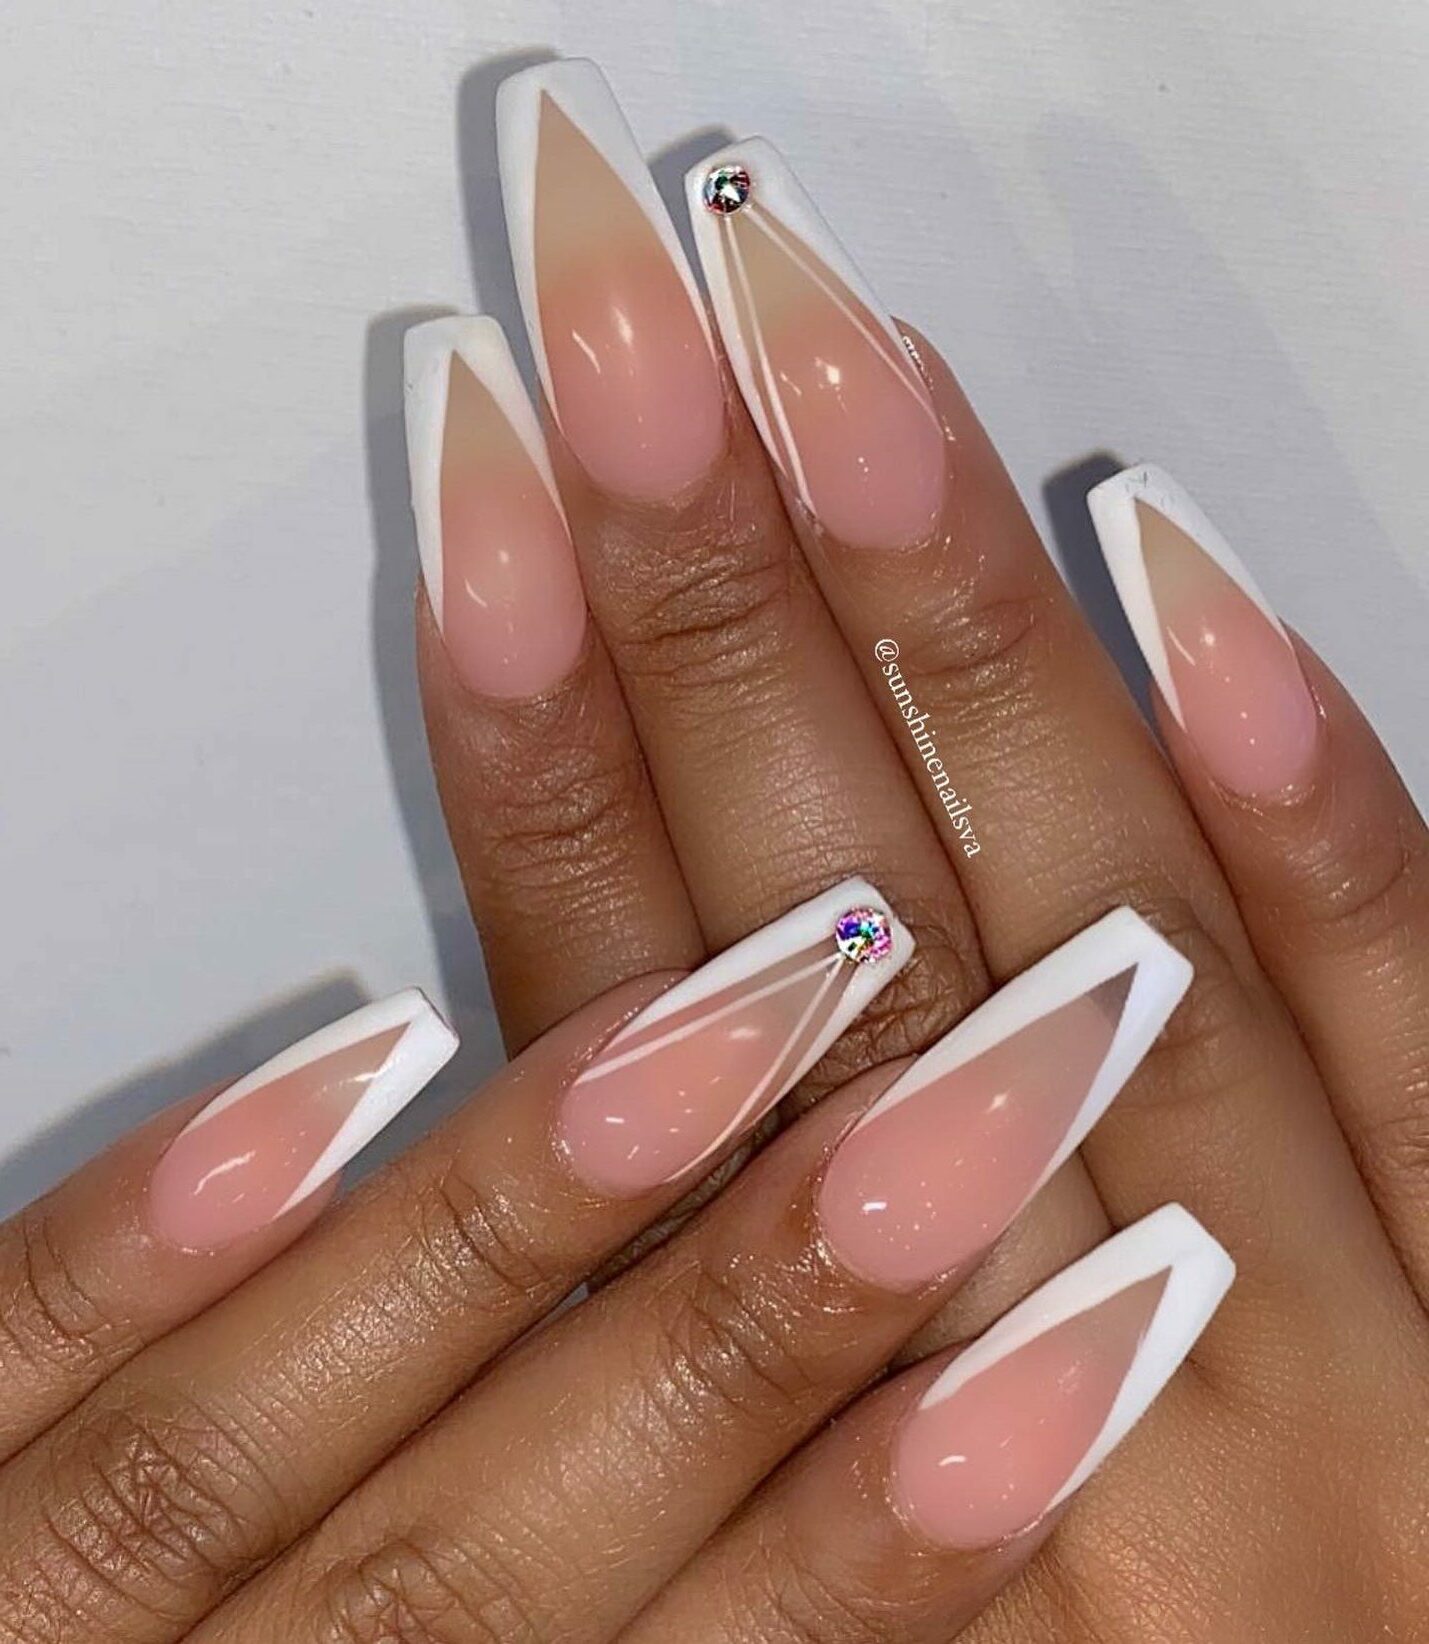 Mix It Up With Nude And White Tips Plus Rhinestones.